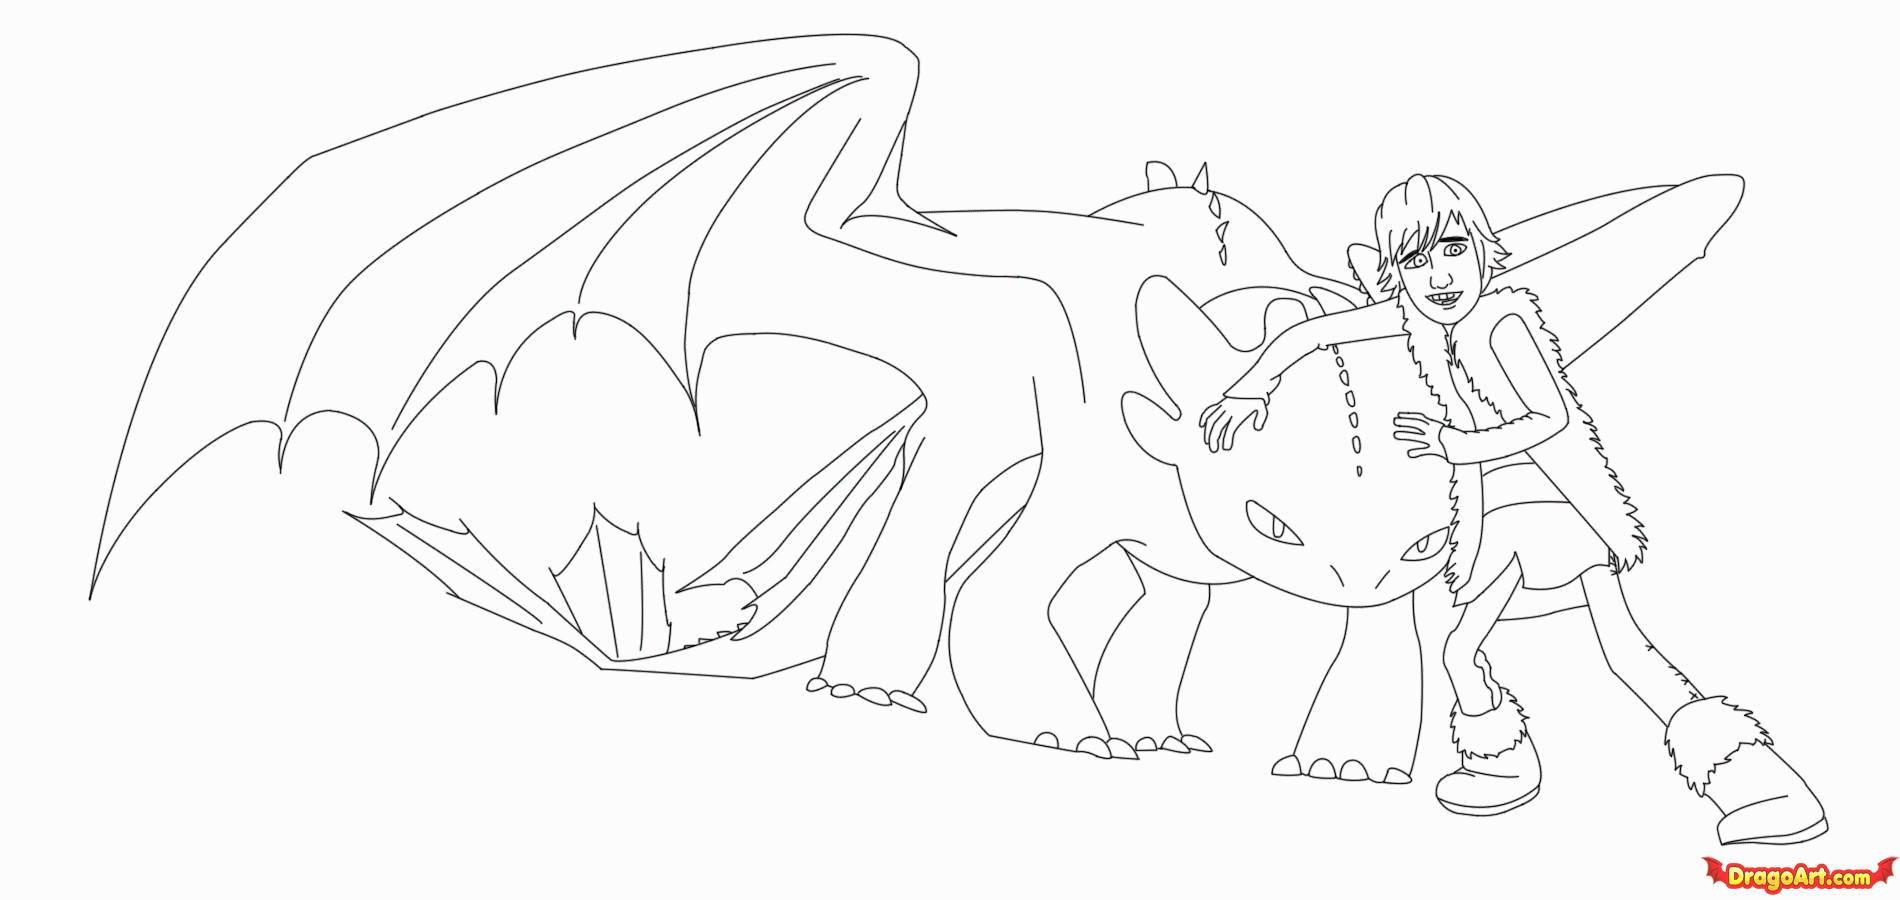 11 Pics of Dragoart Toothless Coloring Pages - How to Train Your ...